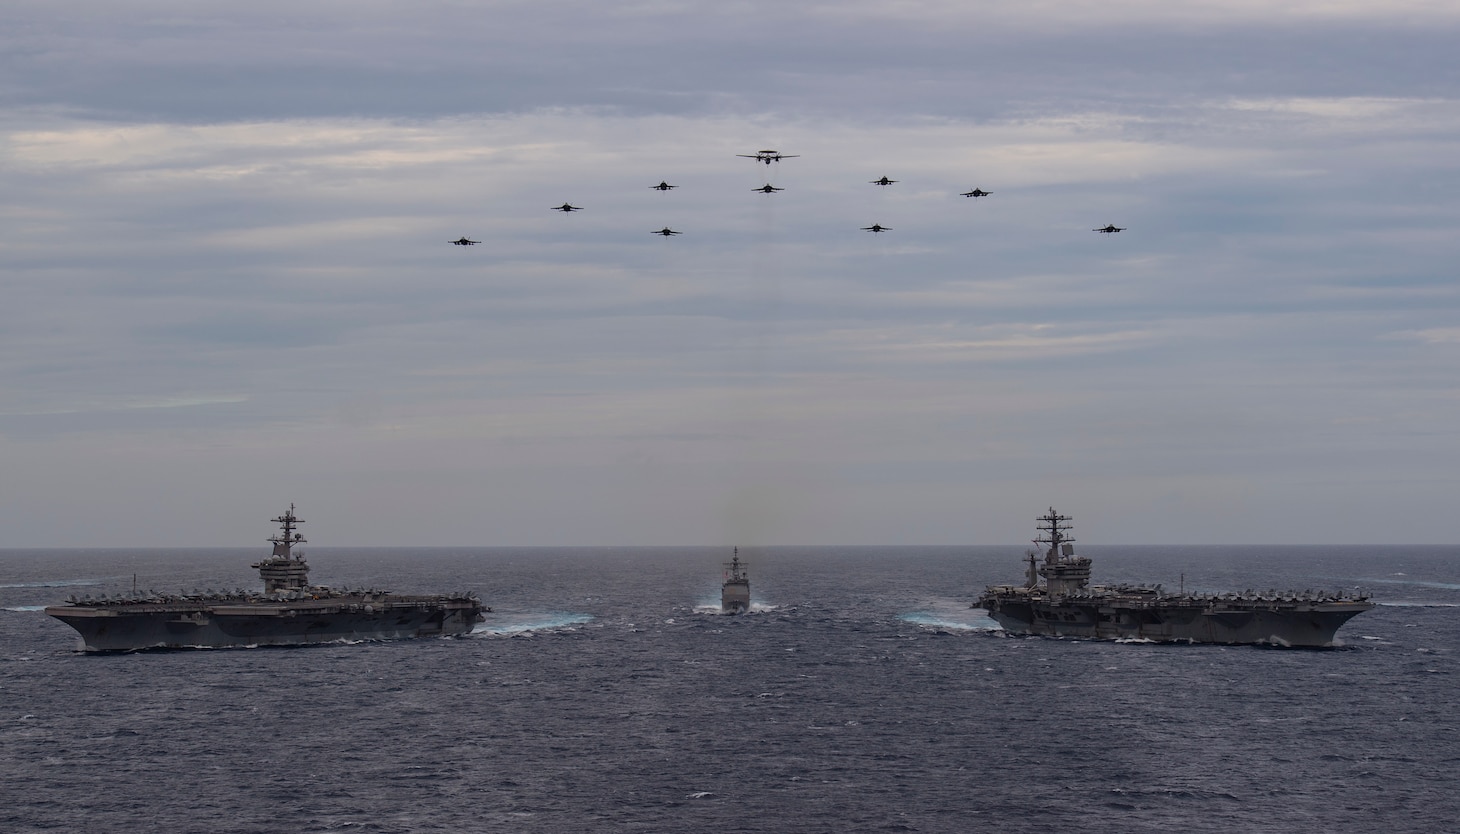 The Theodore Roosevelt and Nimitz Carrier Strike Groups steam in formation on scheduled deployments to the 7th Fleet area of operations. As the U.S. Navy's largest forward-deployed fleet, 7th Fleet routinely operates and interacts with 35 maritime nations while conducting missions to preserve and protect a free and open Indo-Pacific Region.